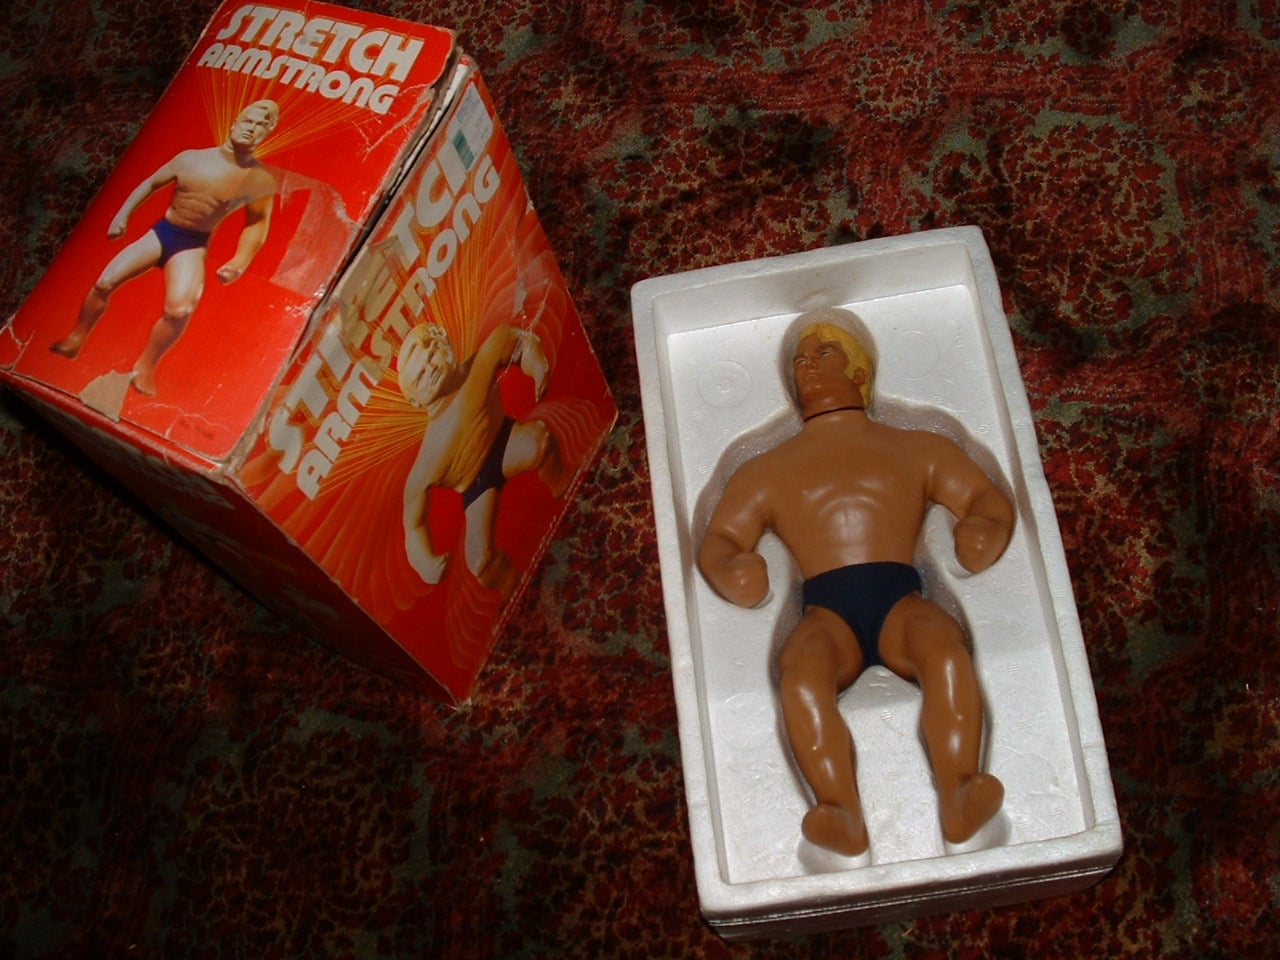 stretch armstrong toy and box 